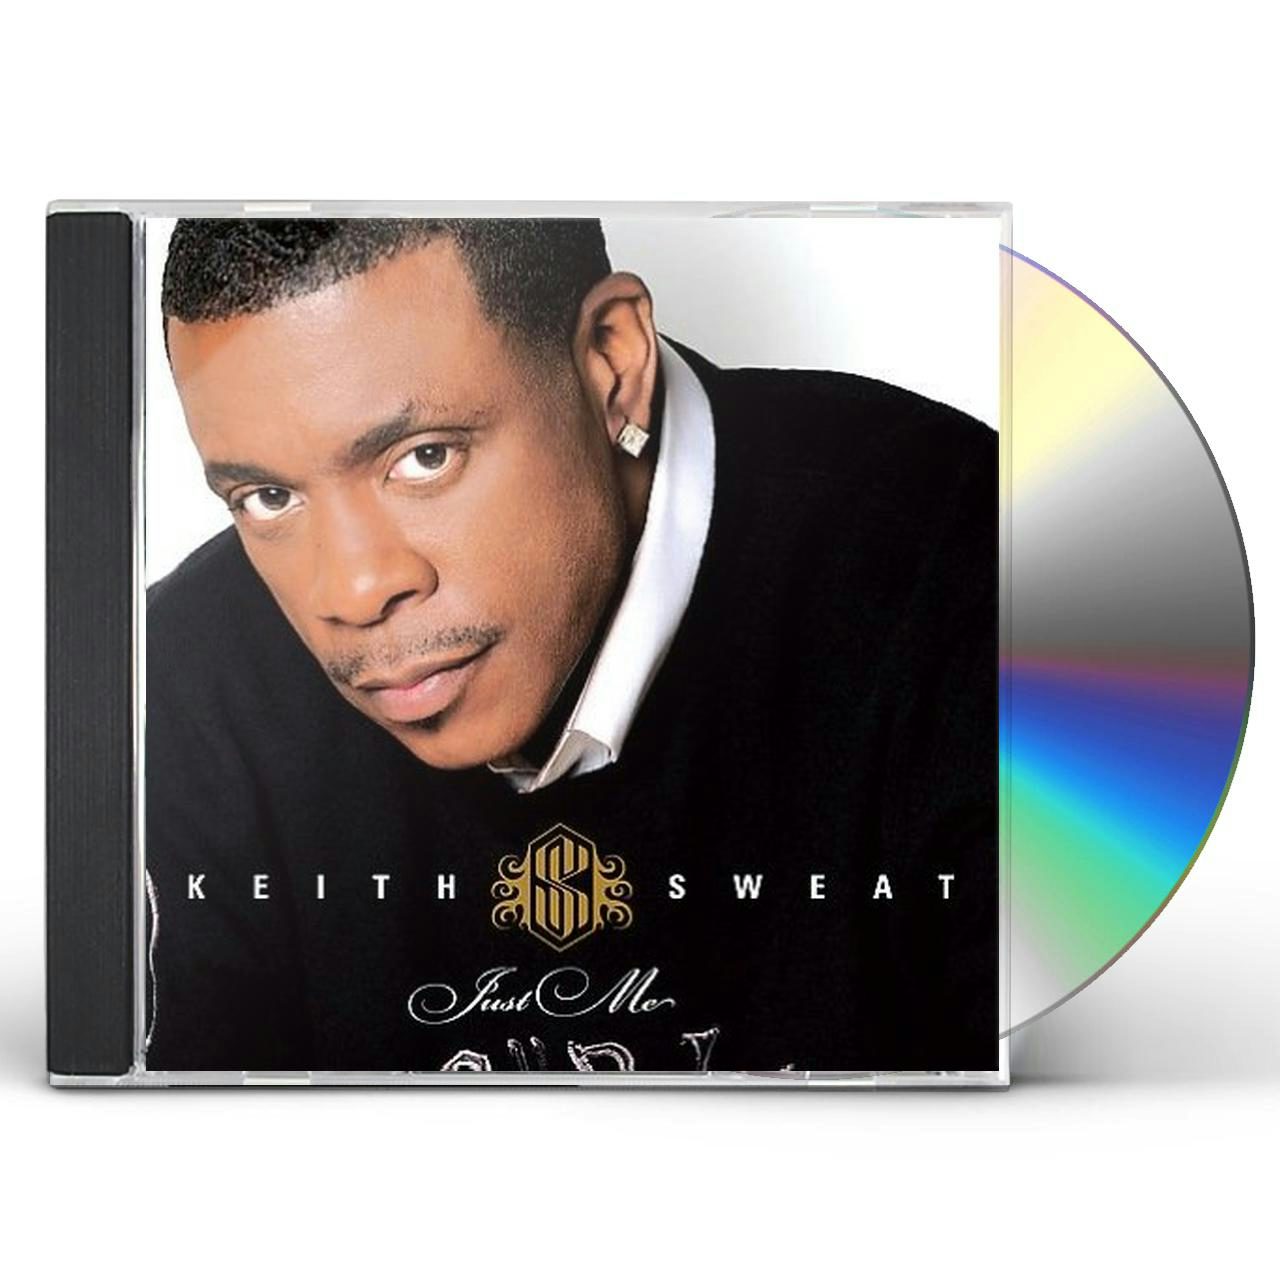 KEITH SWEAT Just Me CD